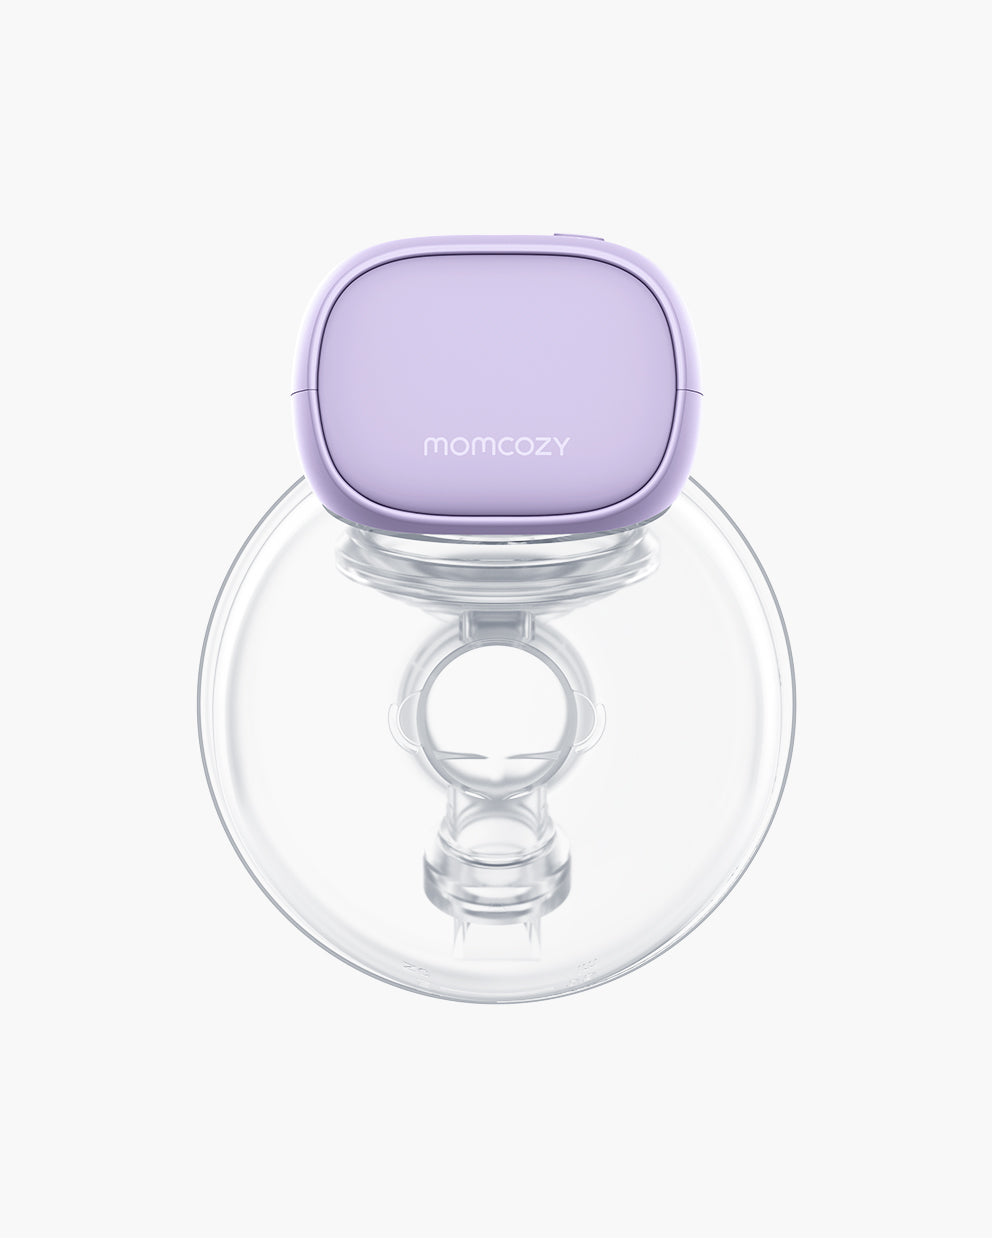 Momcozy Muse 5 Wearable Breast Pump, Electric Breast Pump Hands Free  Purple, One Pump Only 